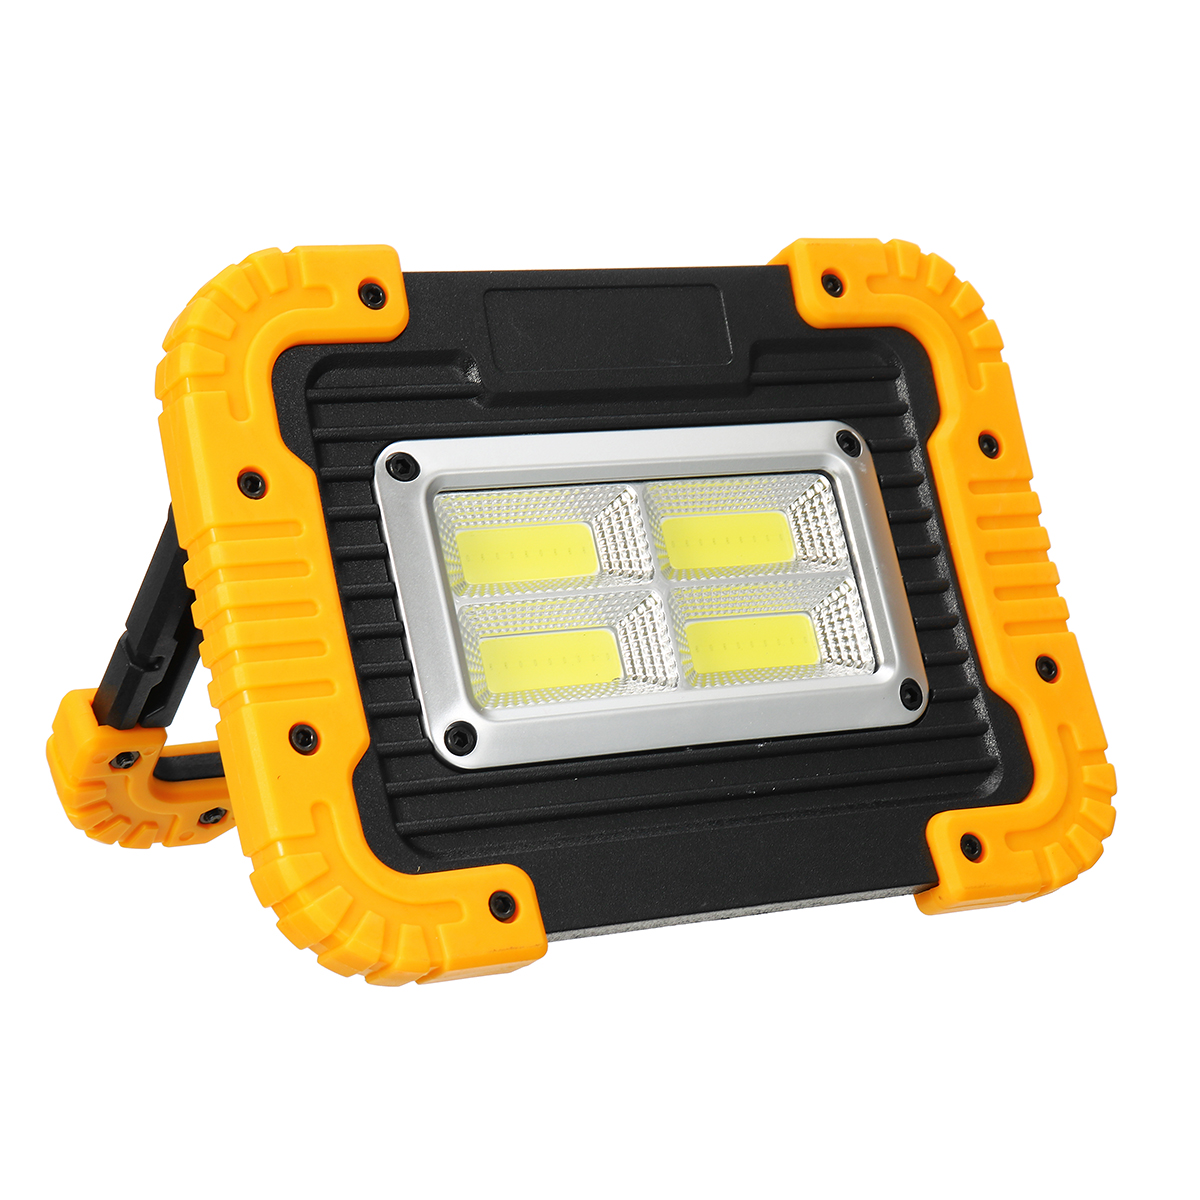 Find 80W LED Solar Flood Light Portable Rechargeable Outdoor Garden Work Spot Lamp for Sale on Gipsybee.com with cryptocurrencies